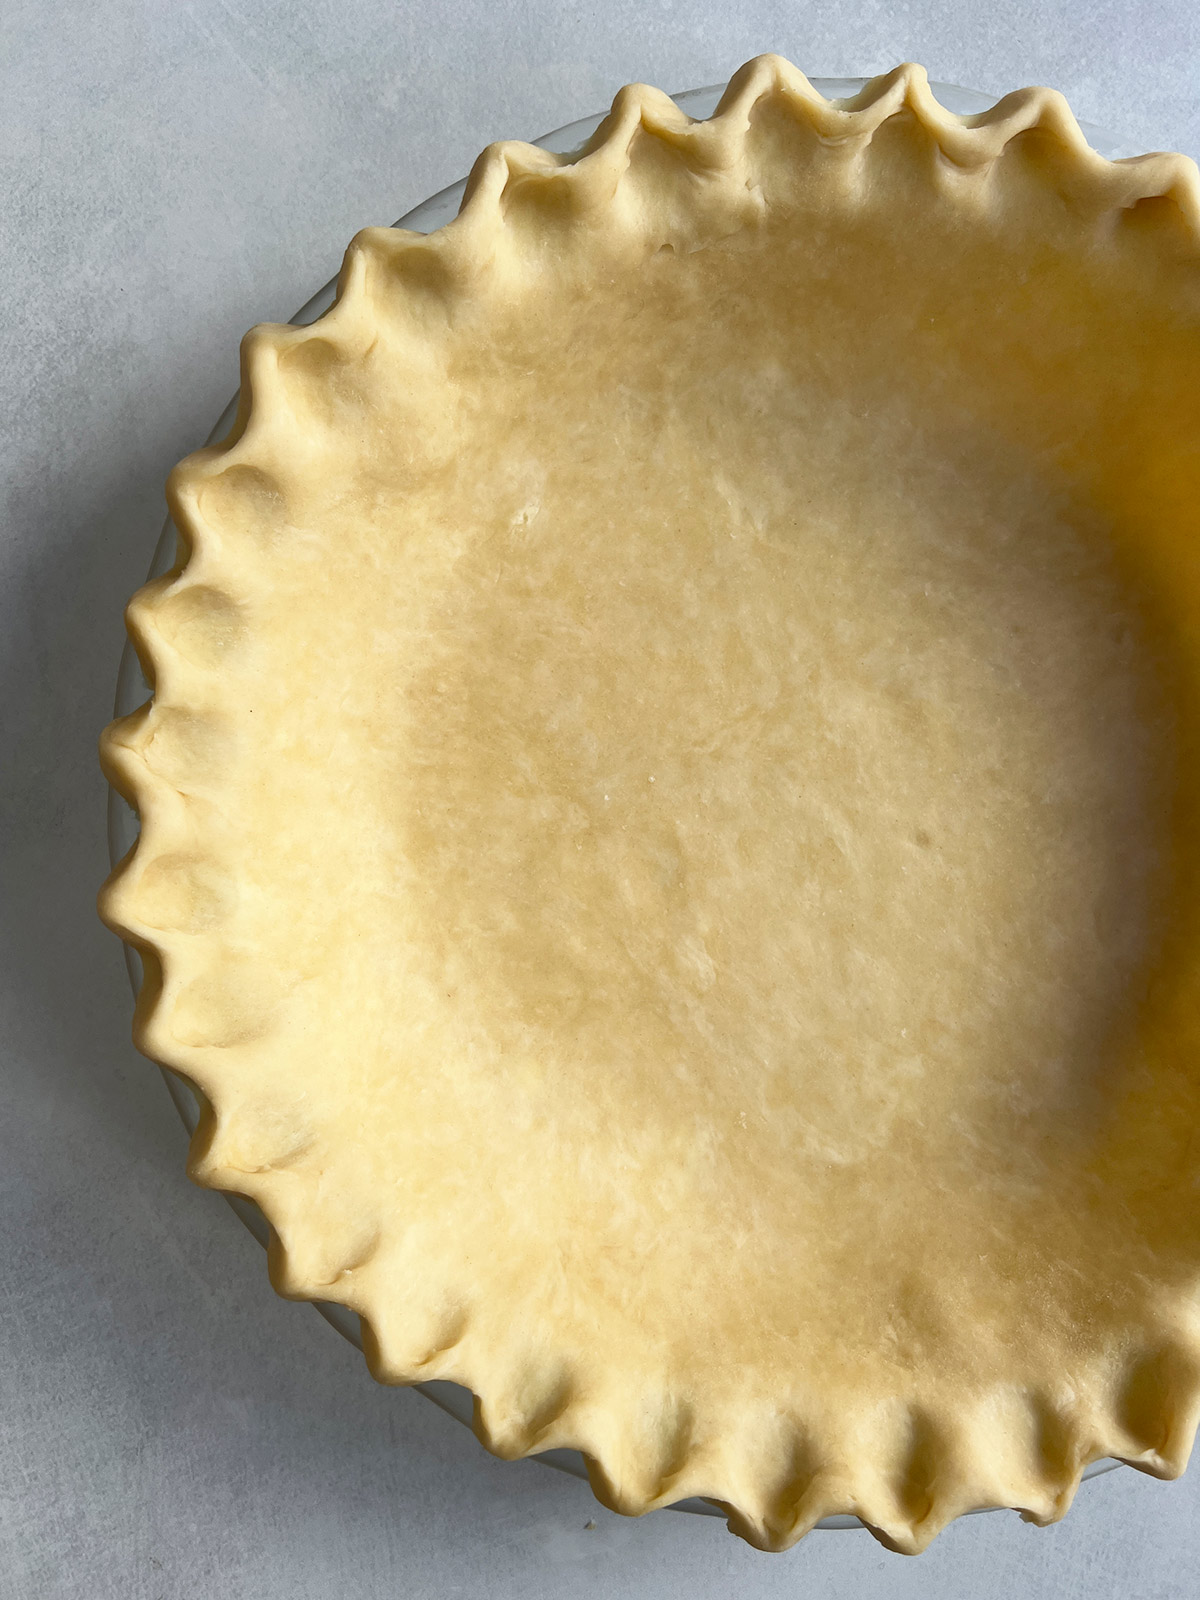 Pie crust in a pie pan with a fluted edge.